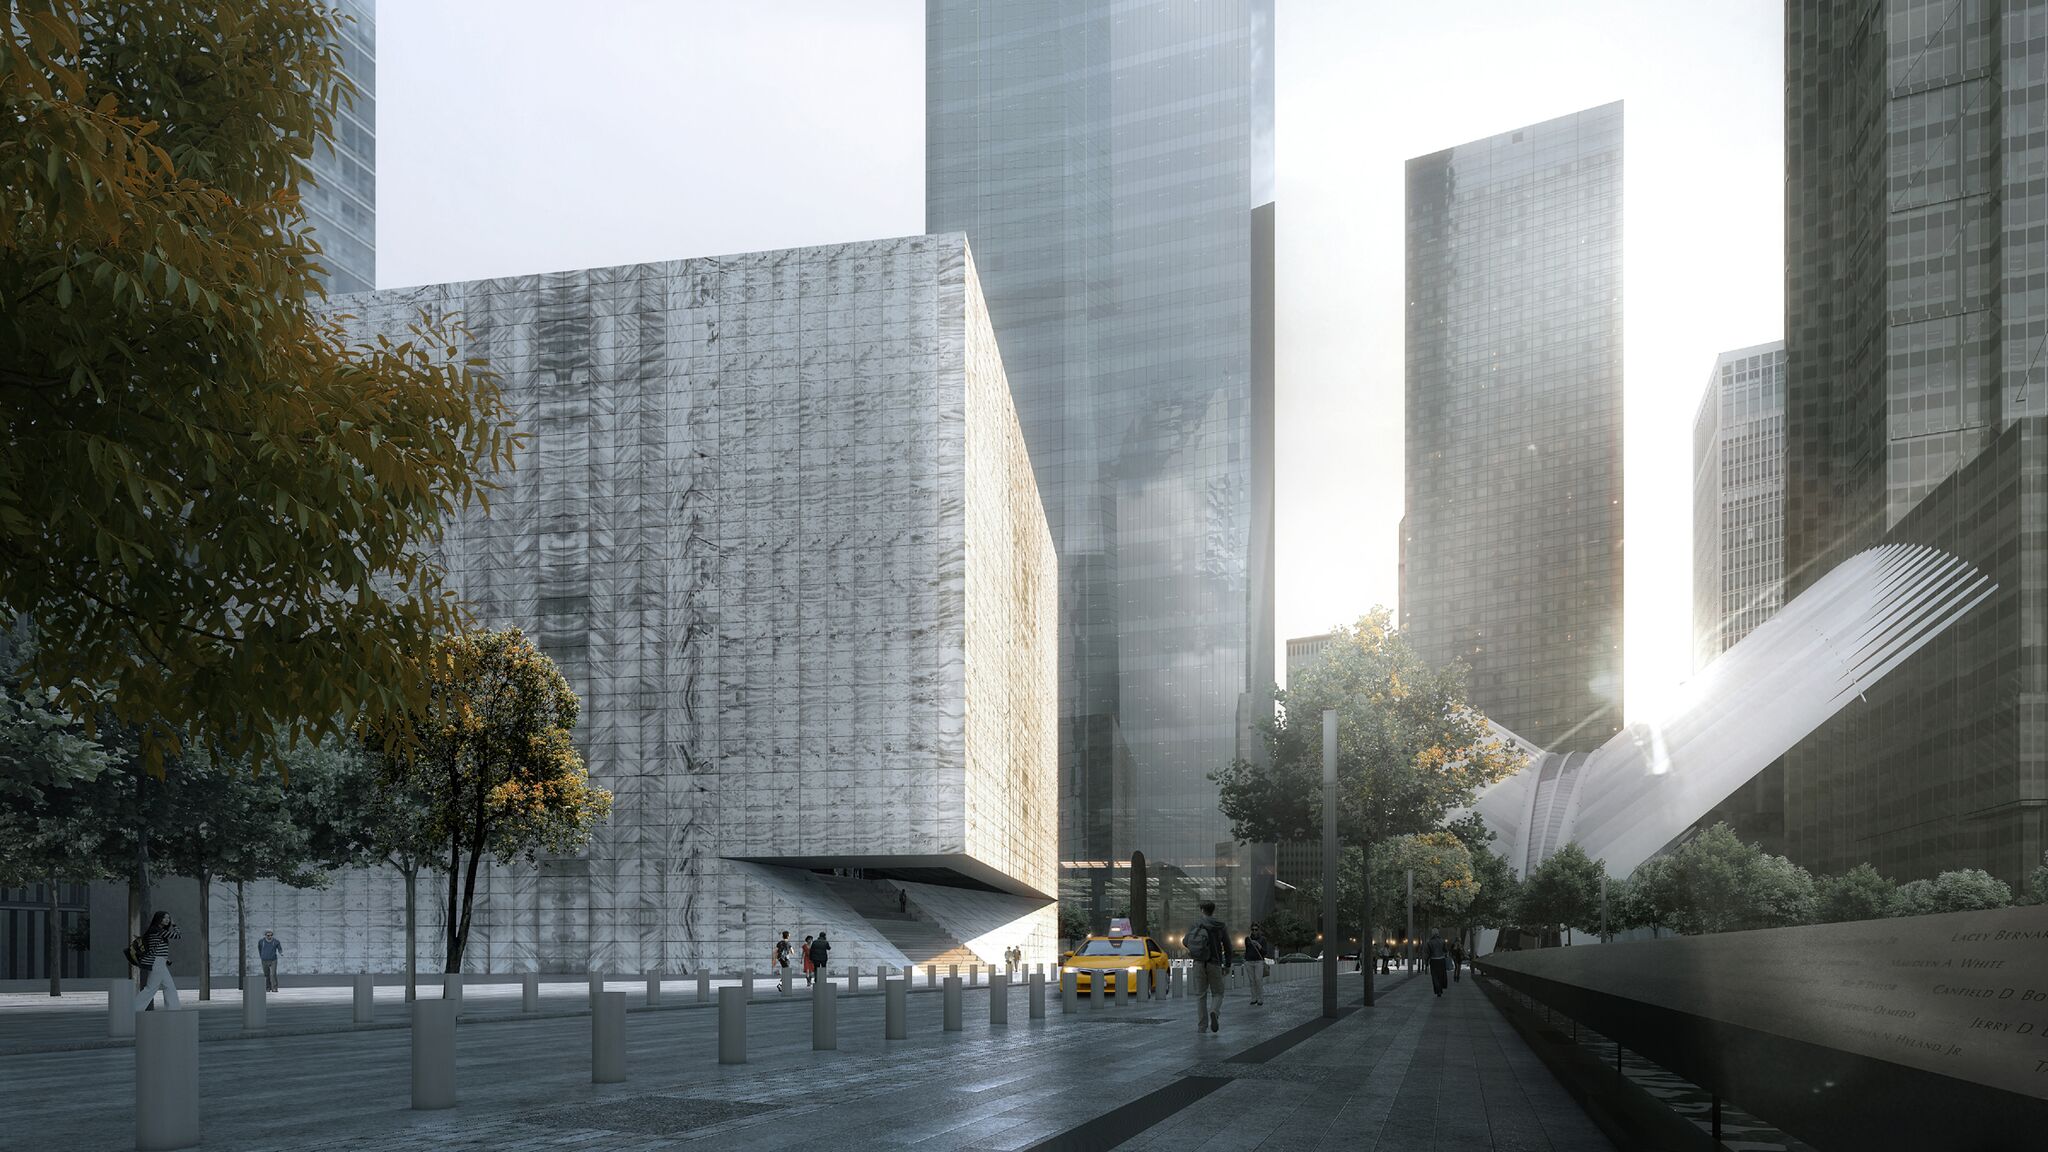 Plan for a performing arts space at the World Trade Center moves forward